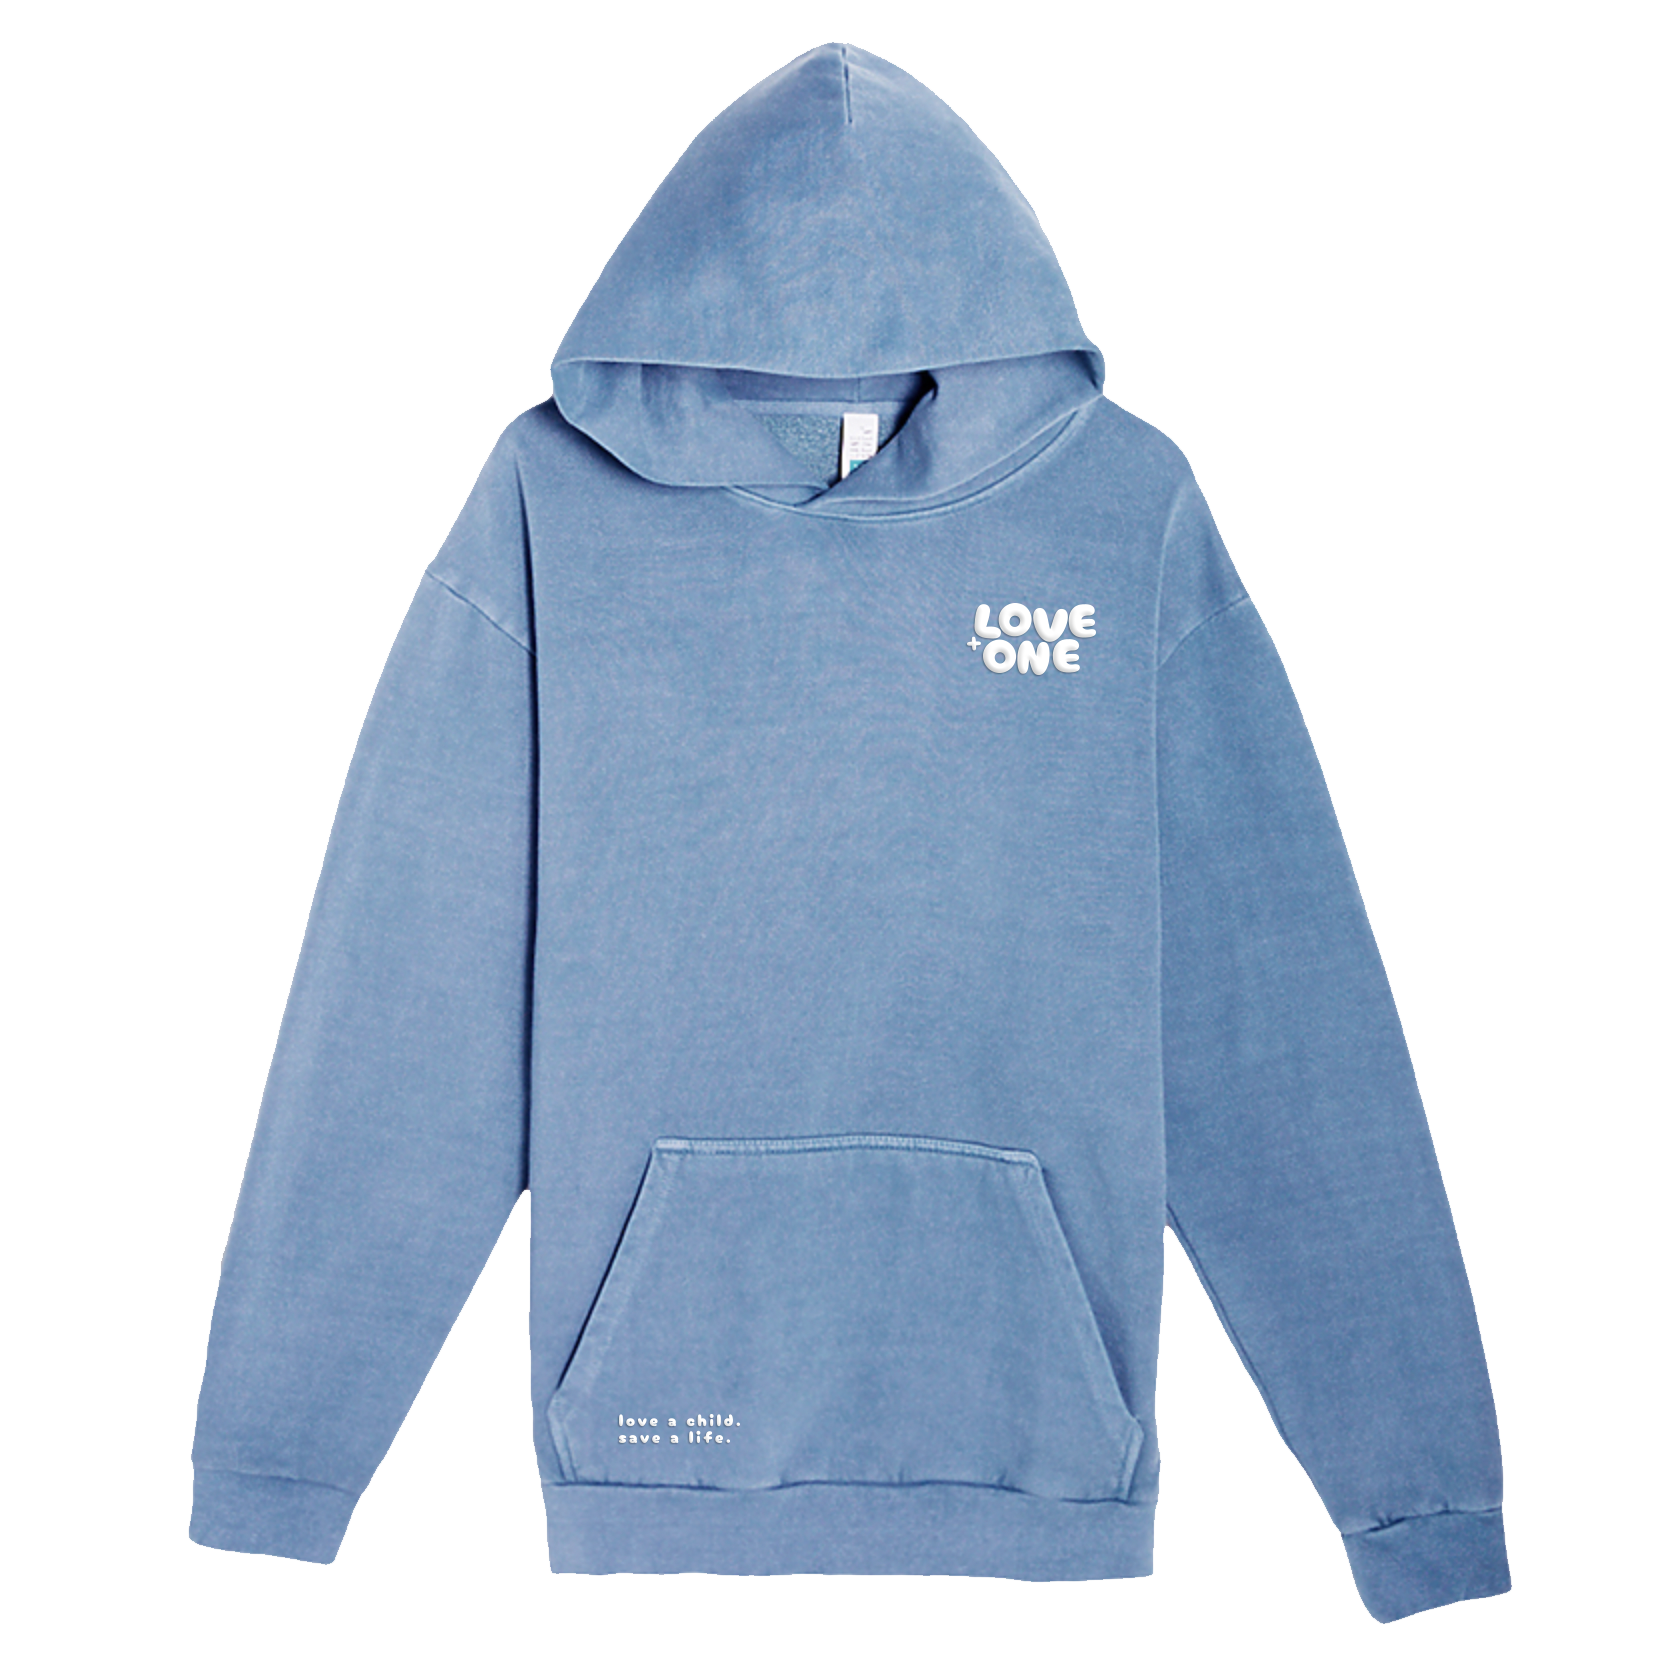 light blue hoodie with Love One written in white, left chest area